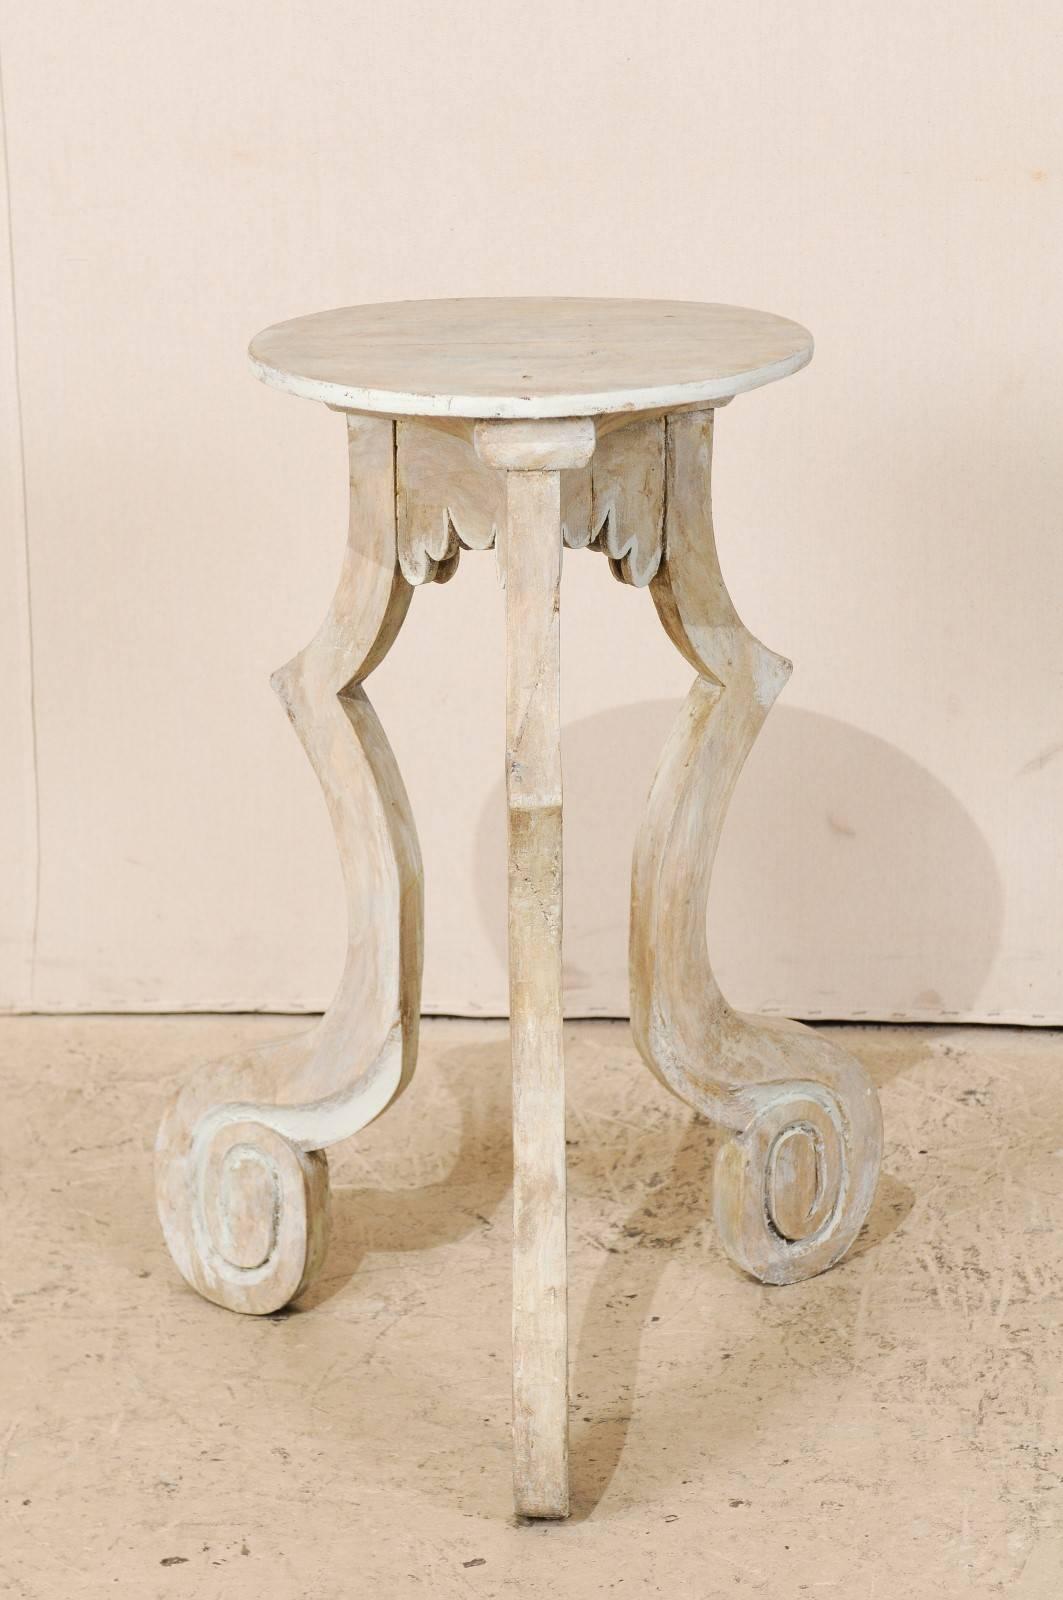 Carved Spanish Painted Wood Table Stand or Side Table in Light Beige Color, Three Legs